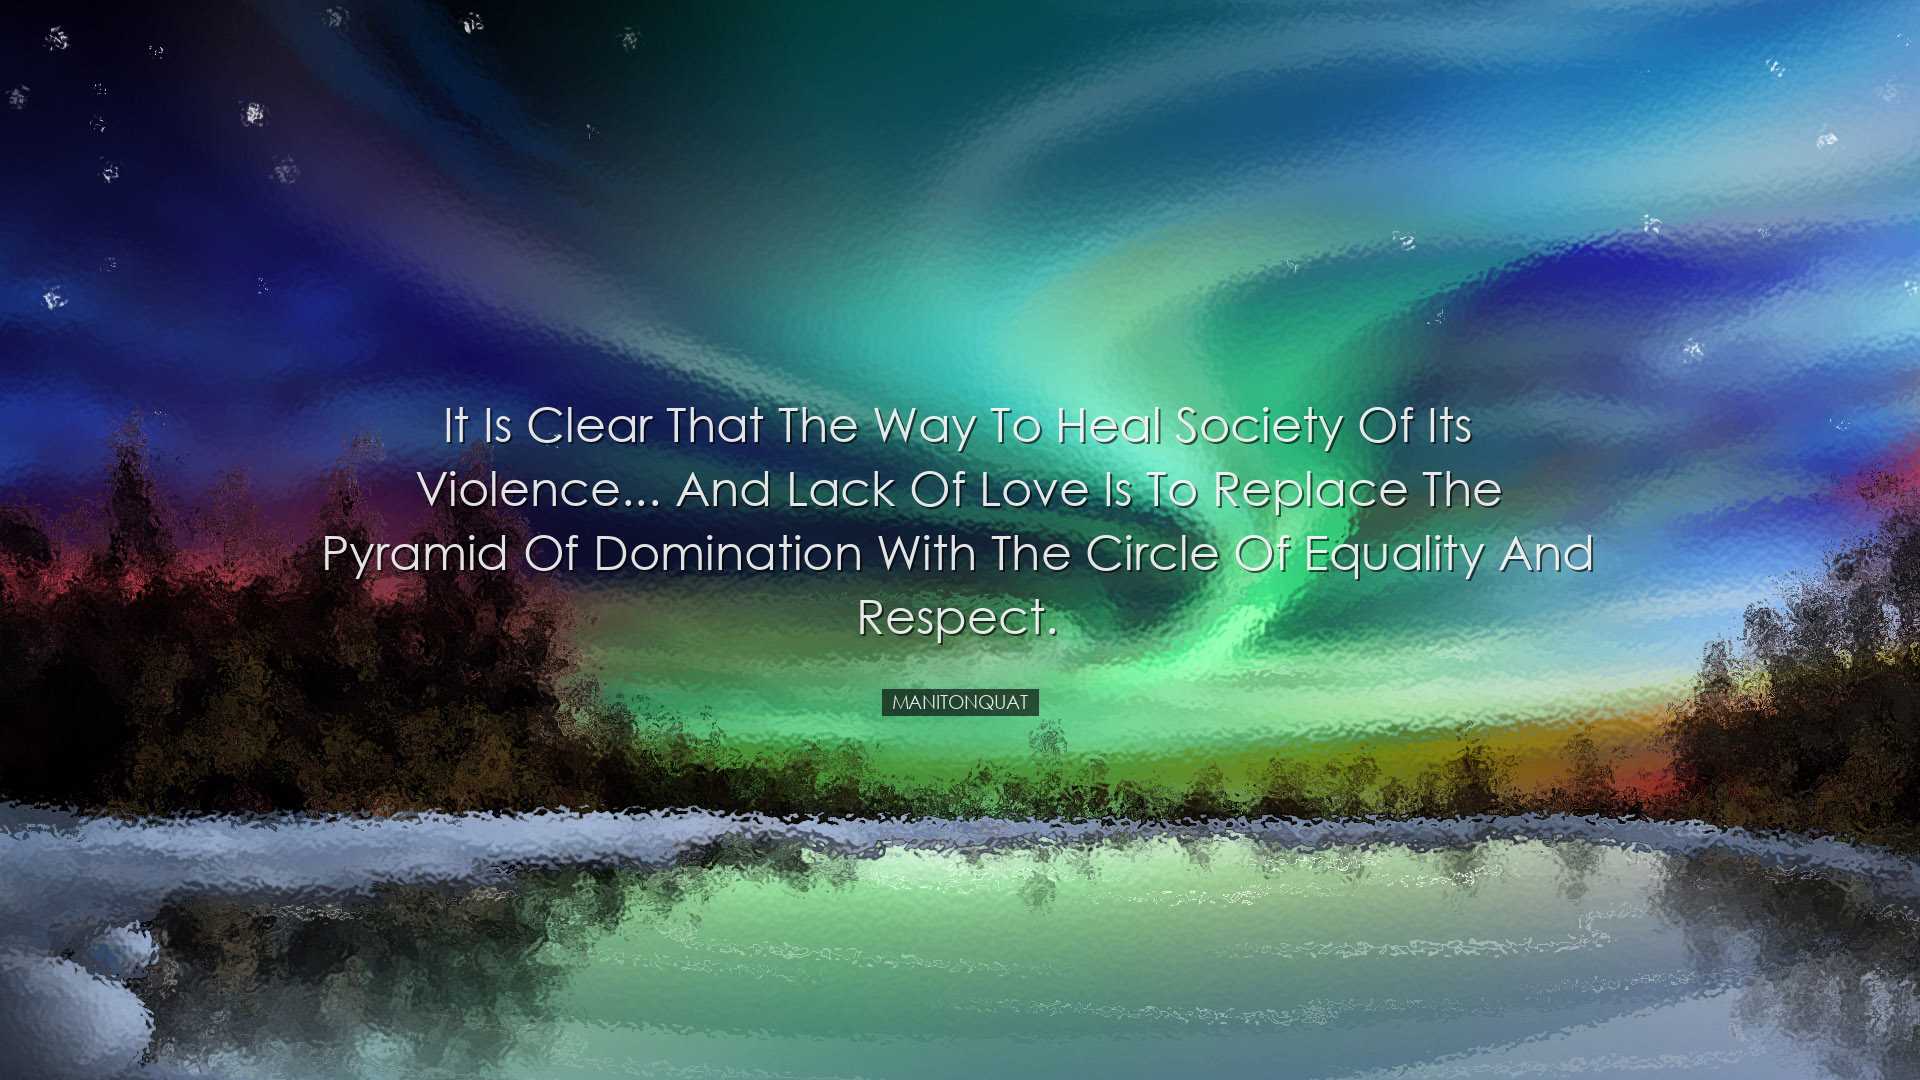 It is clear that the way to heal society of its violence... and la